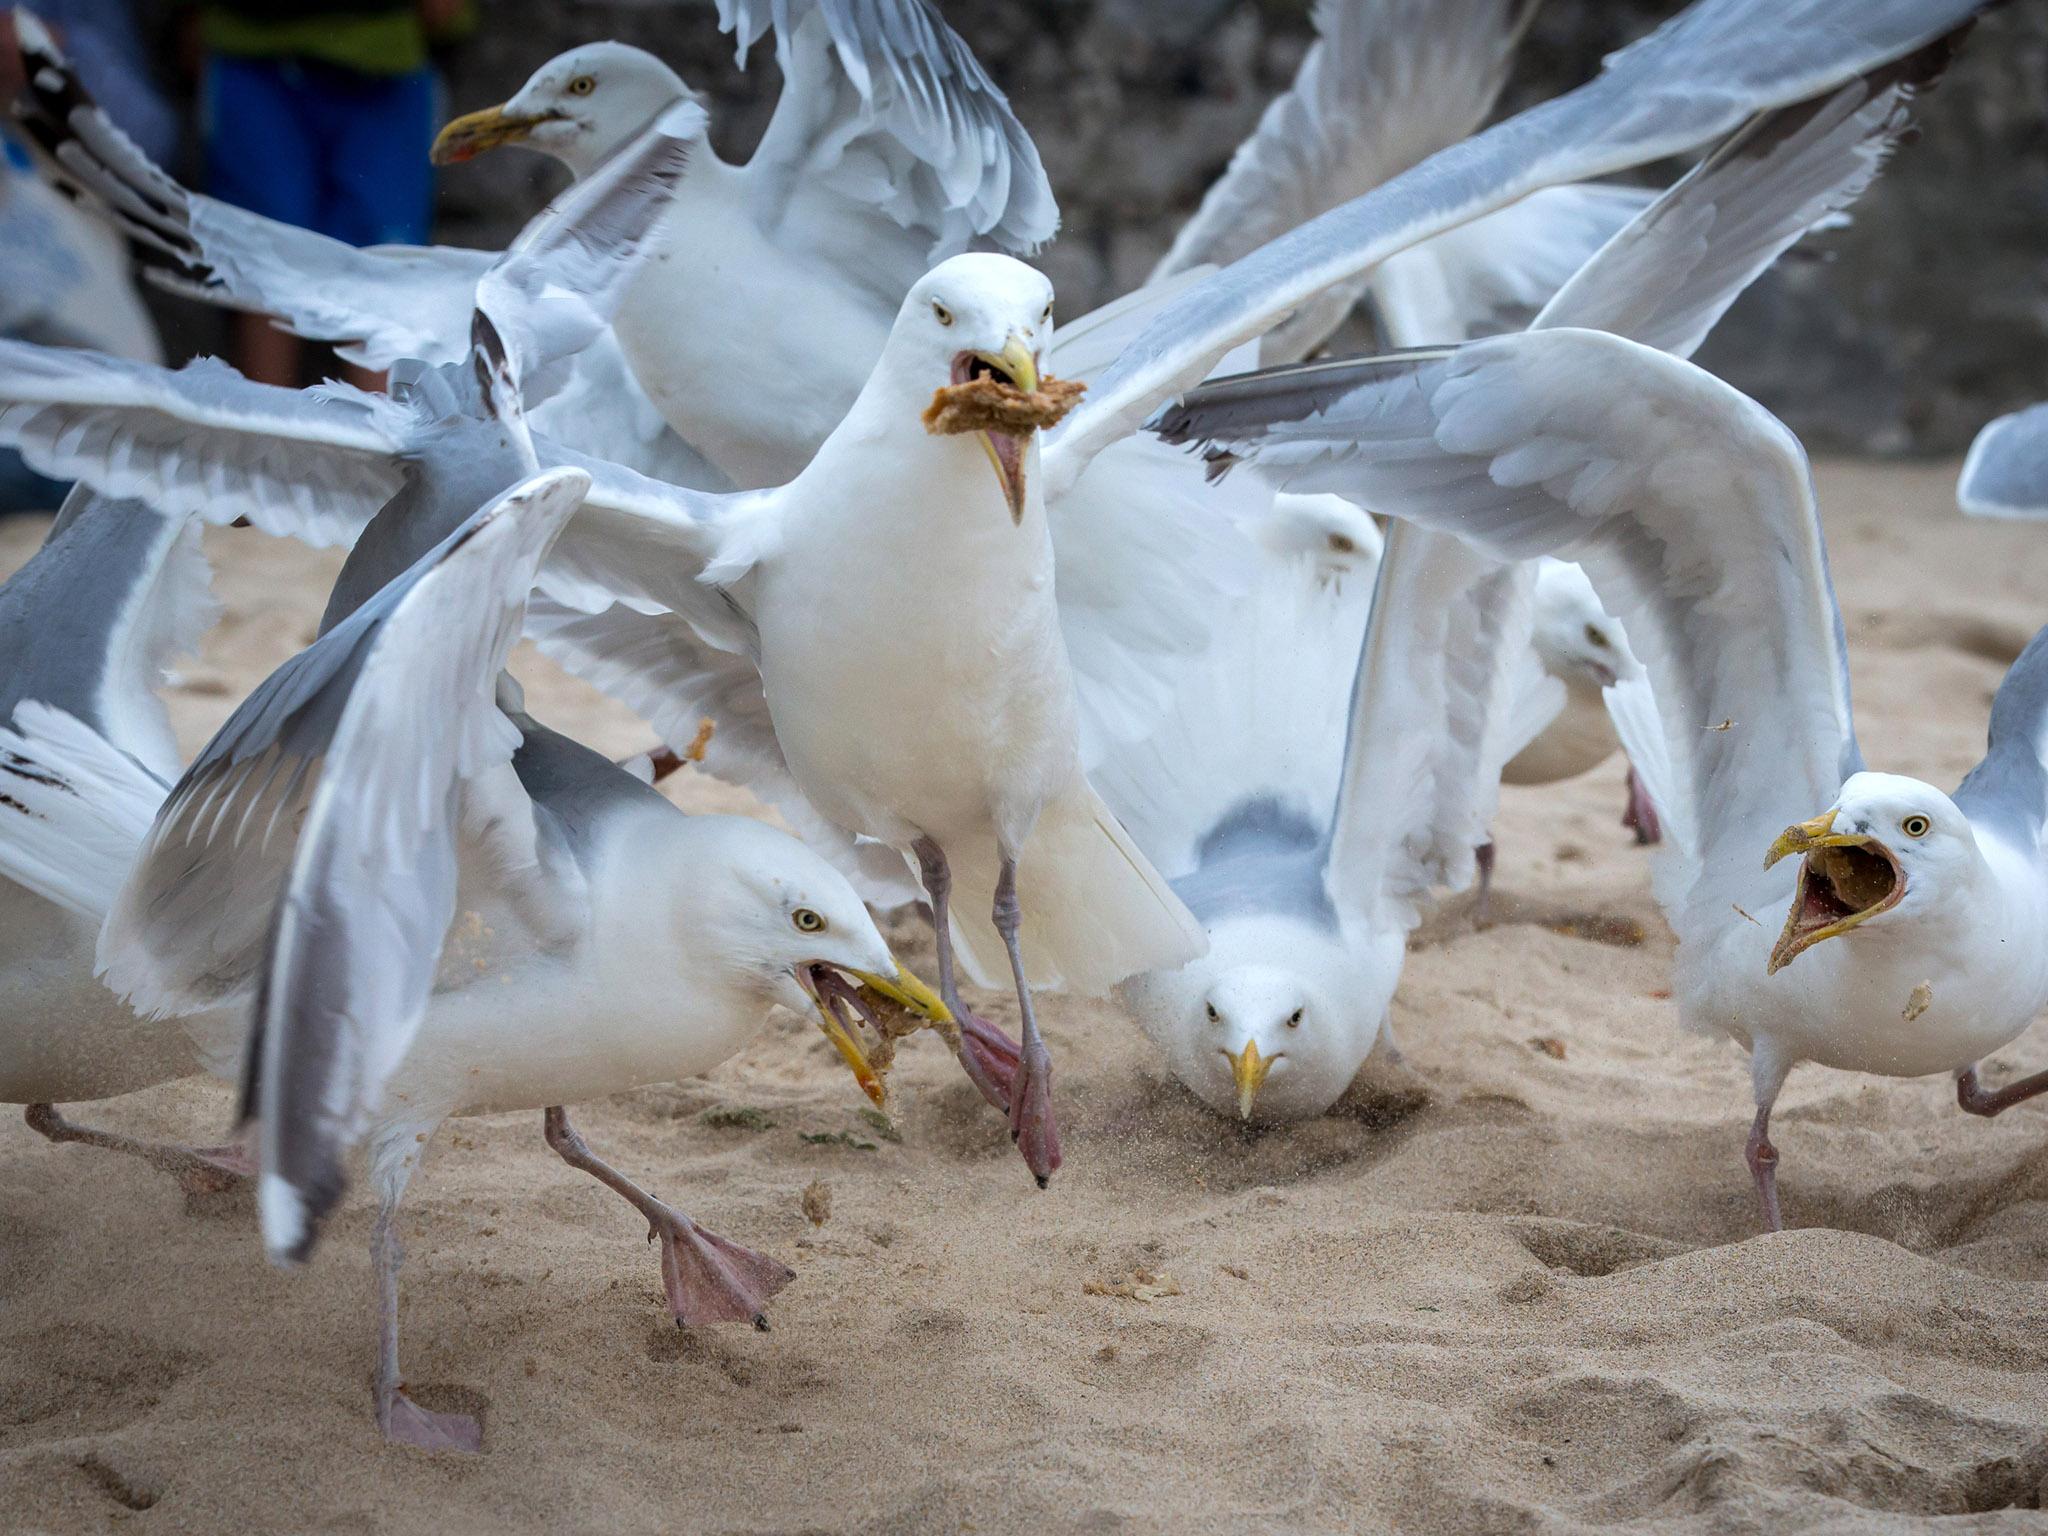 The eggs of some seagulls are considered a culinary delicacy and sell for £7 per egg